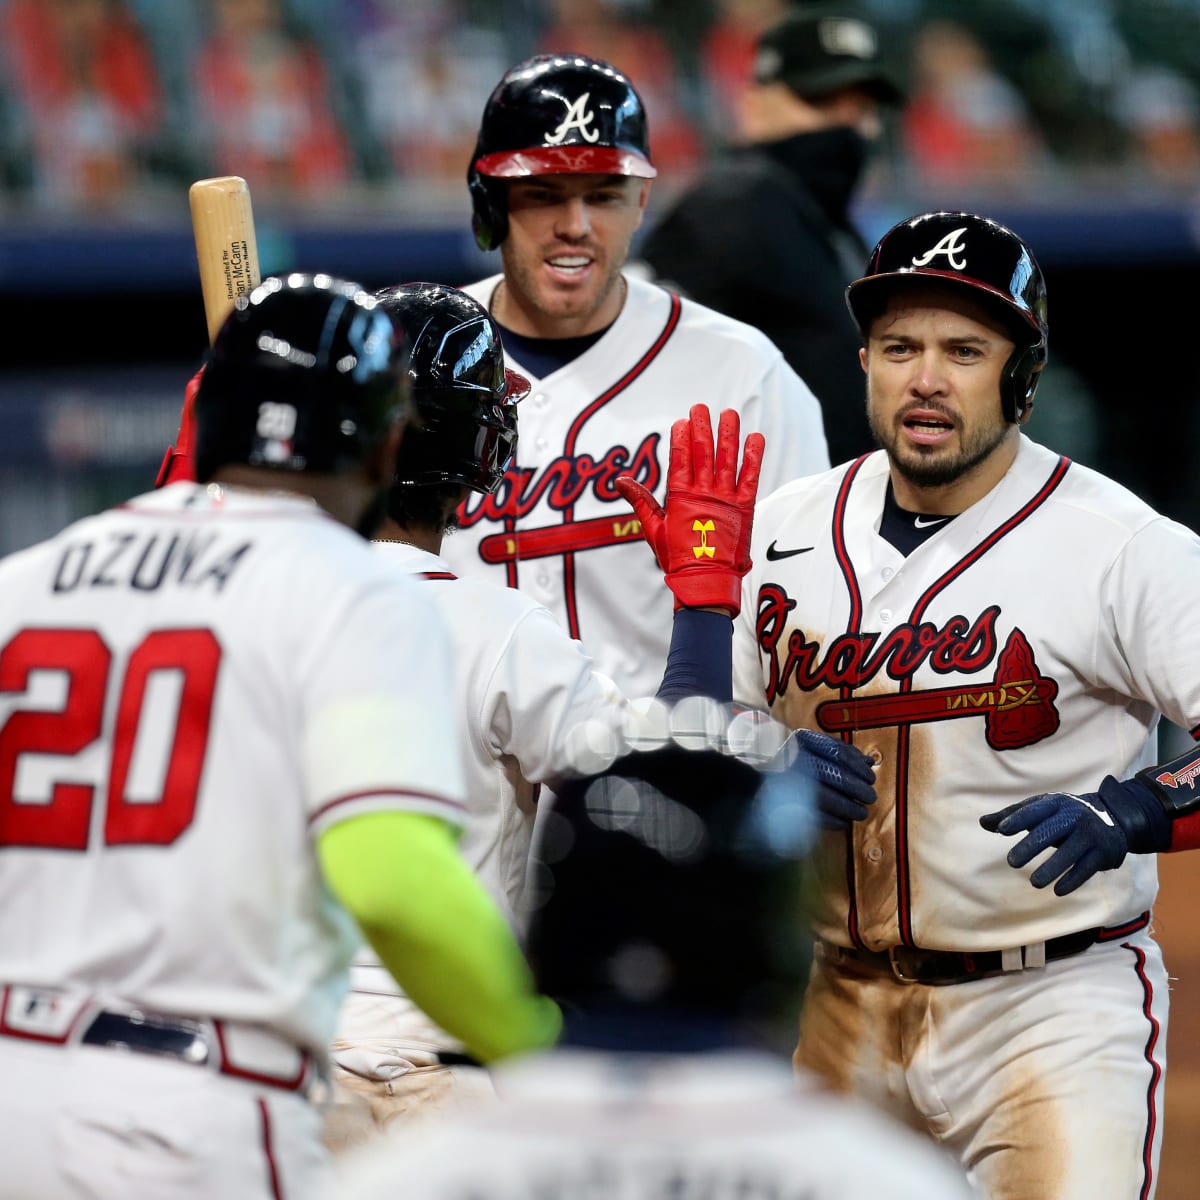 Swanson may be long shot for Braves' NLDS roster